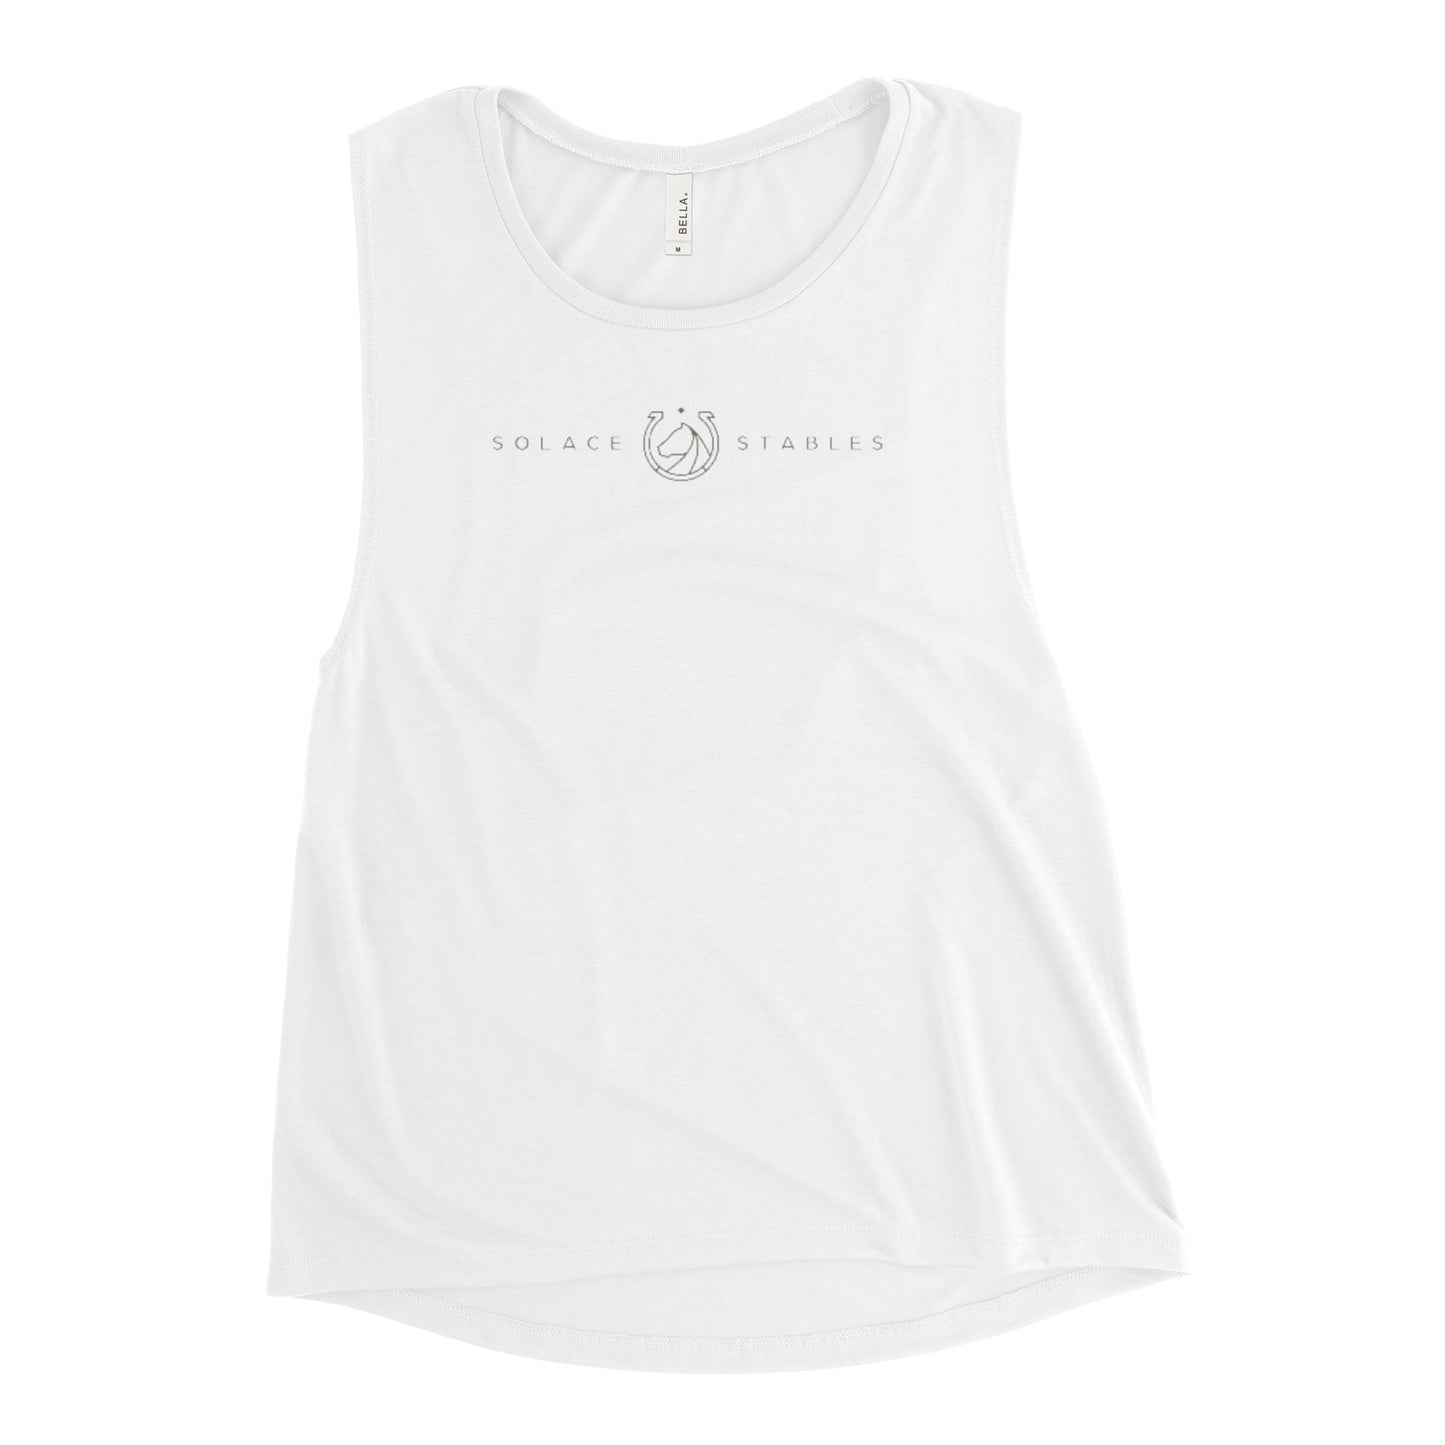 Women's Muscle Tank "SOLACE STABLES" in Basic Black on Classic White